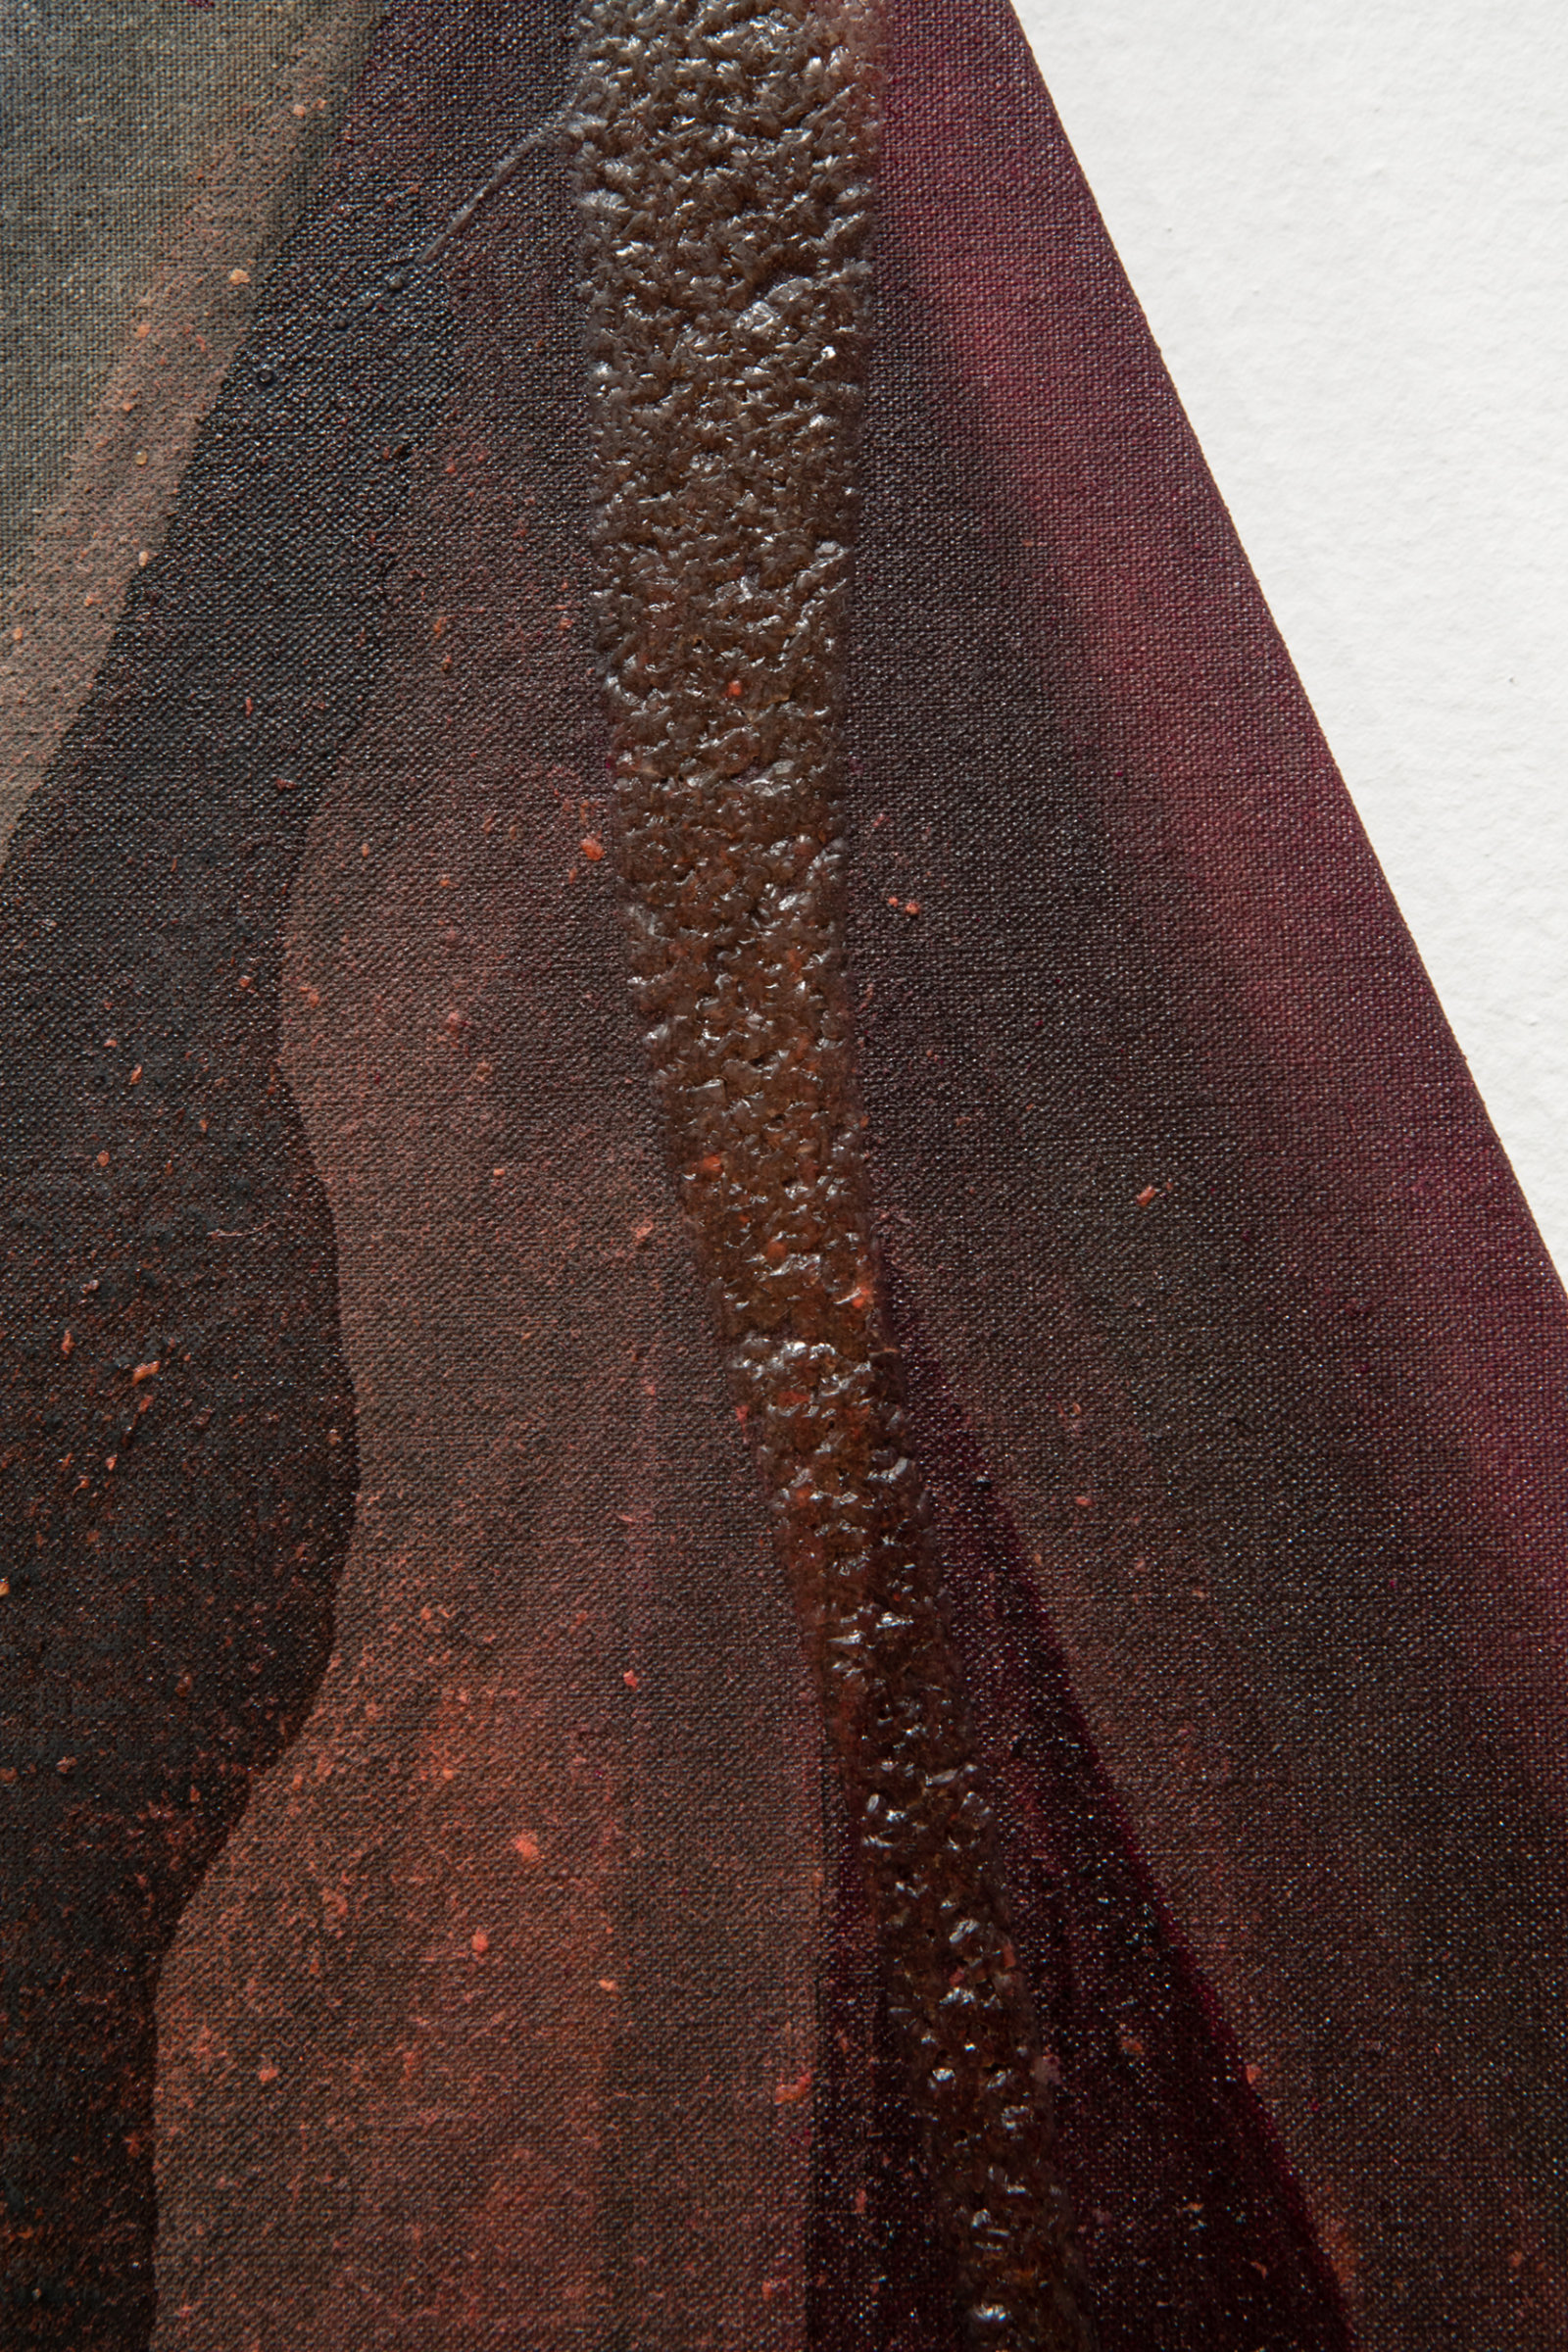 Duane Linklater, they have piled the stone / as they promised / without syrup 1 (detail), 2023, digital print on linen, cochineal, tea, sumac, charcoal, maple syrup, 36 x 30 in. (91 x 76 cm)